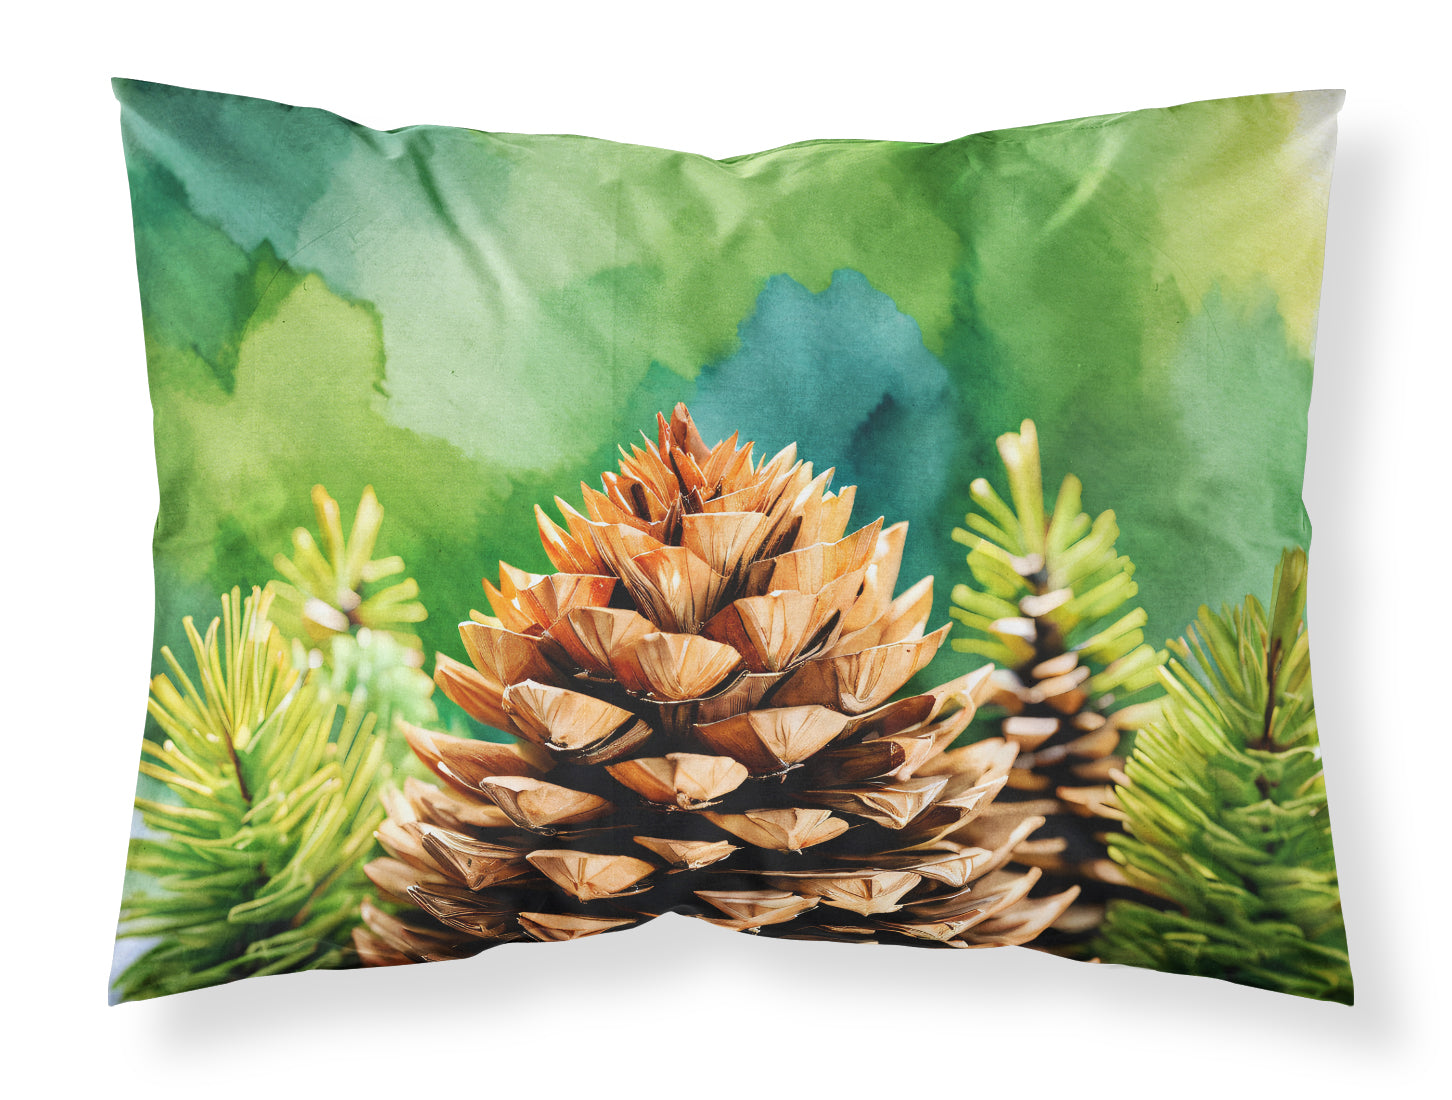 Buy this Maine White Pine Cone and Tassels in Watercolor Fabric Standard Pillowcase